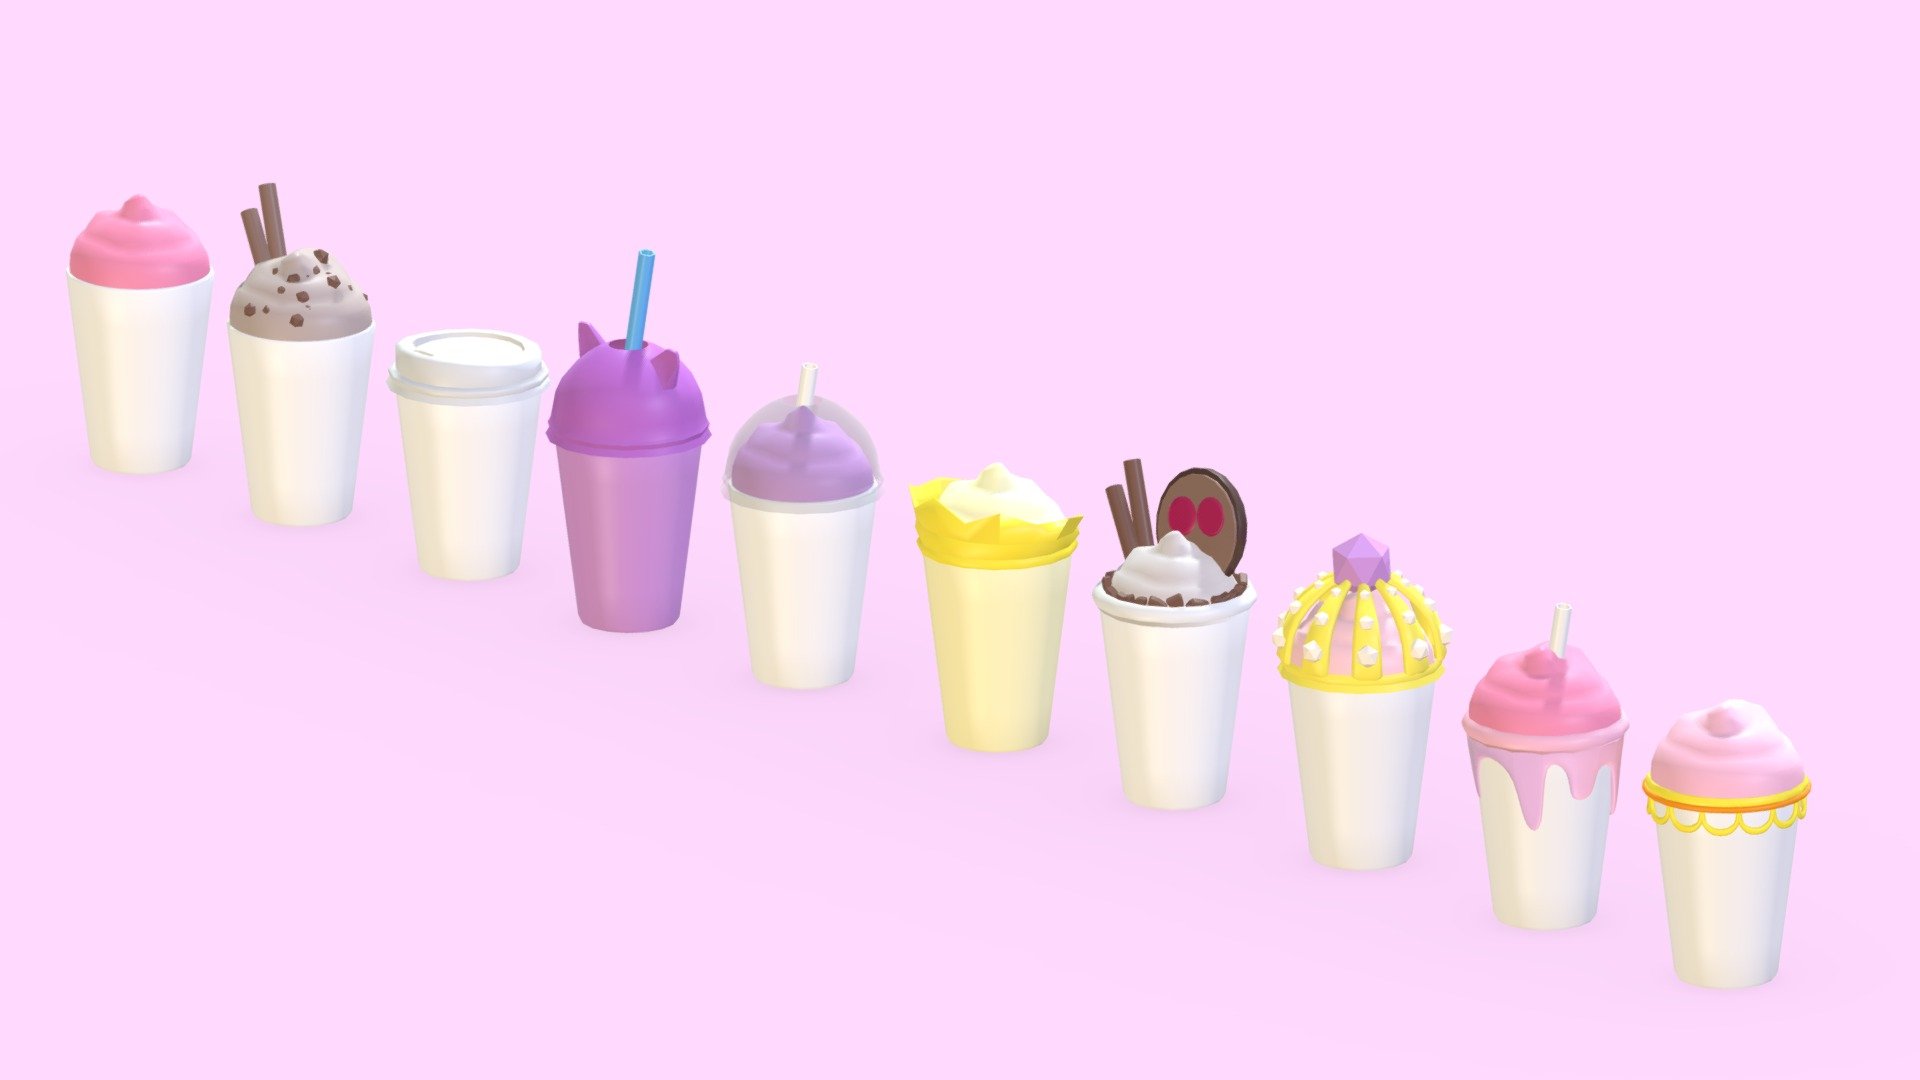 Low Poly Game Ready Cup Pack


Created On Blender
Easly Combinable Modular Pieces
Total 25k tris
Game Ready

Textures


Only 1 texture that easly changeable uv maps
1919 x 673 png texture
 - Low Poly Game Ready Cup Pack - 3D model by ardasener 3d model